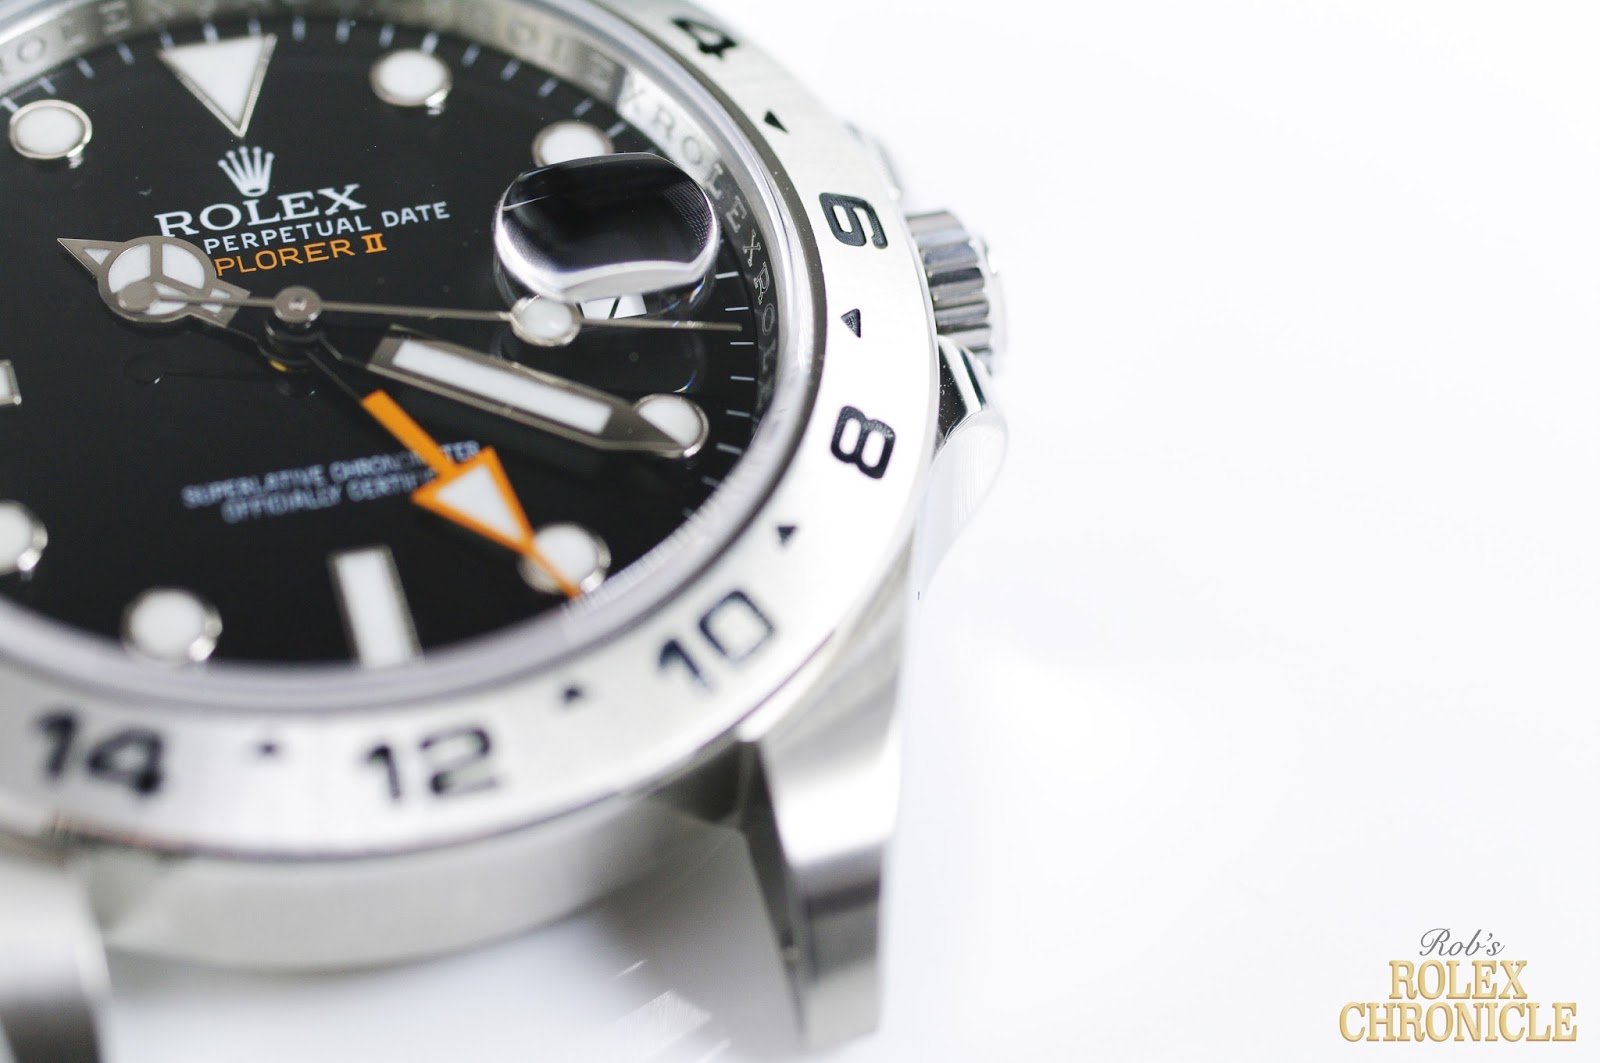 Rolex Submariner LV  Watches photography, Latest watches, Watch blog